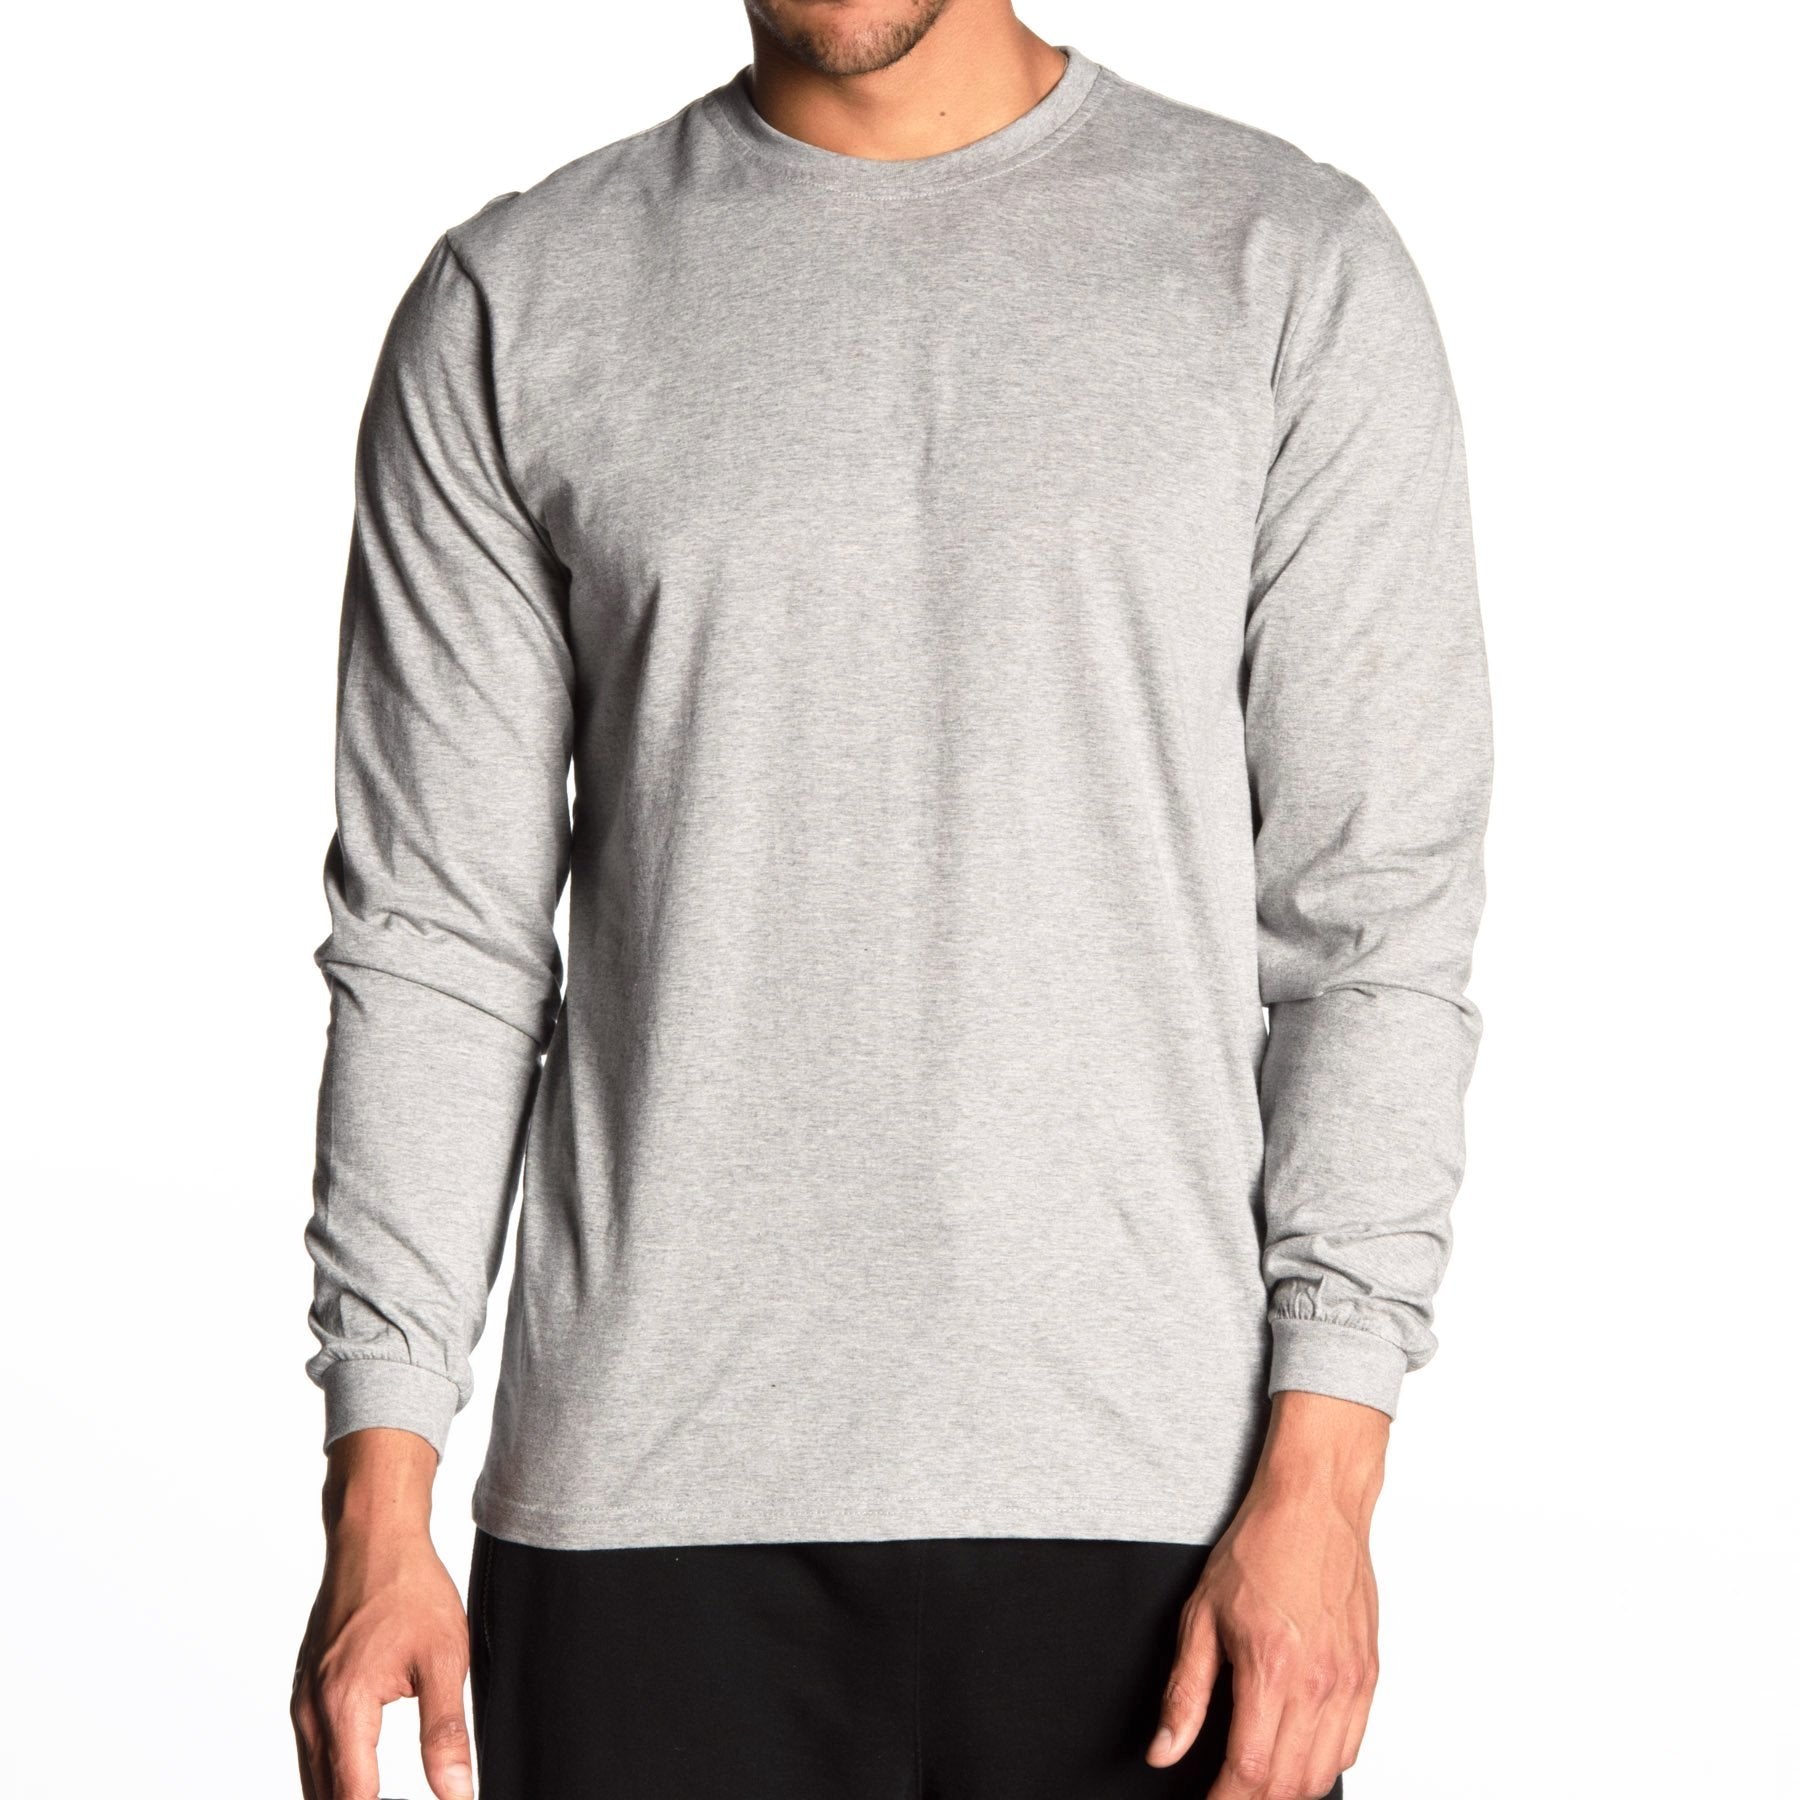 Fitted Long Sleeves